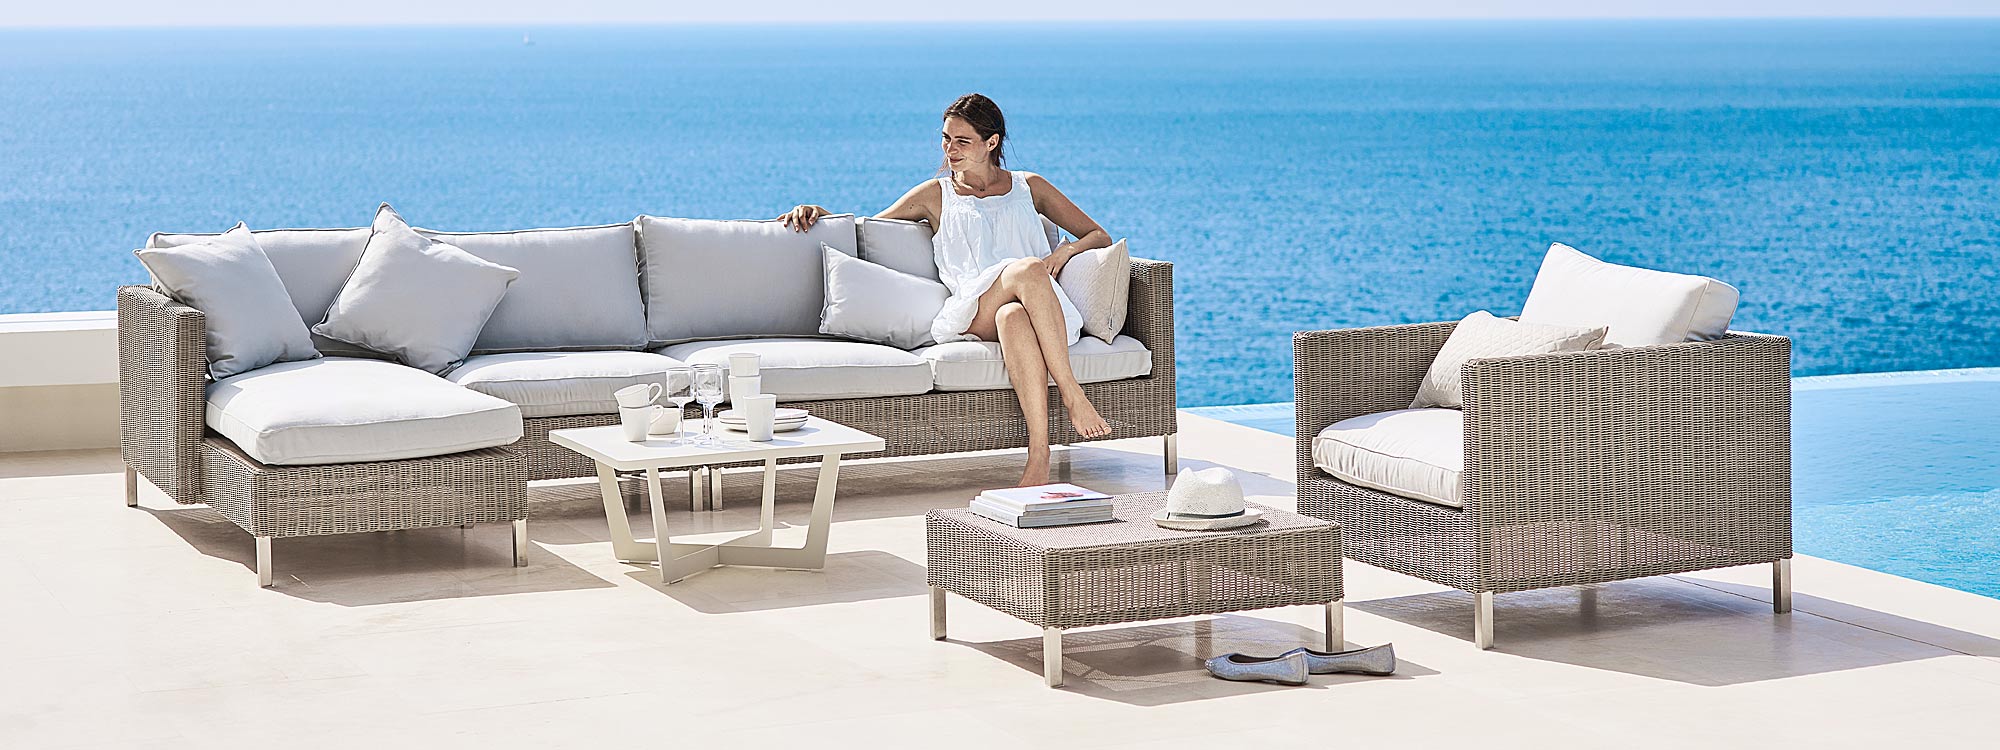 Connect rattan garden sofa is a modular outdoor sofa in low maintenance garden furniture materials by Caneline furniture company